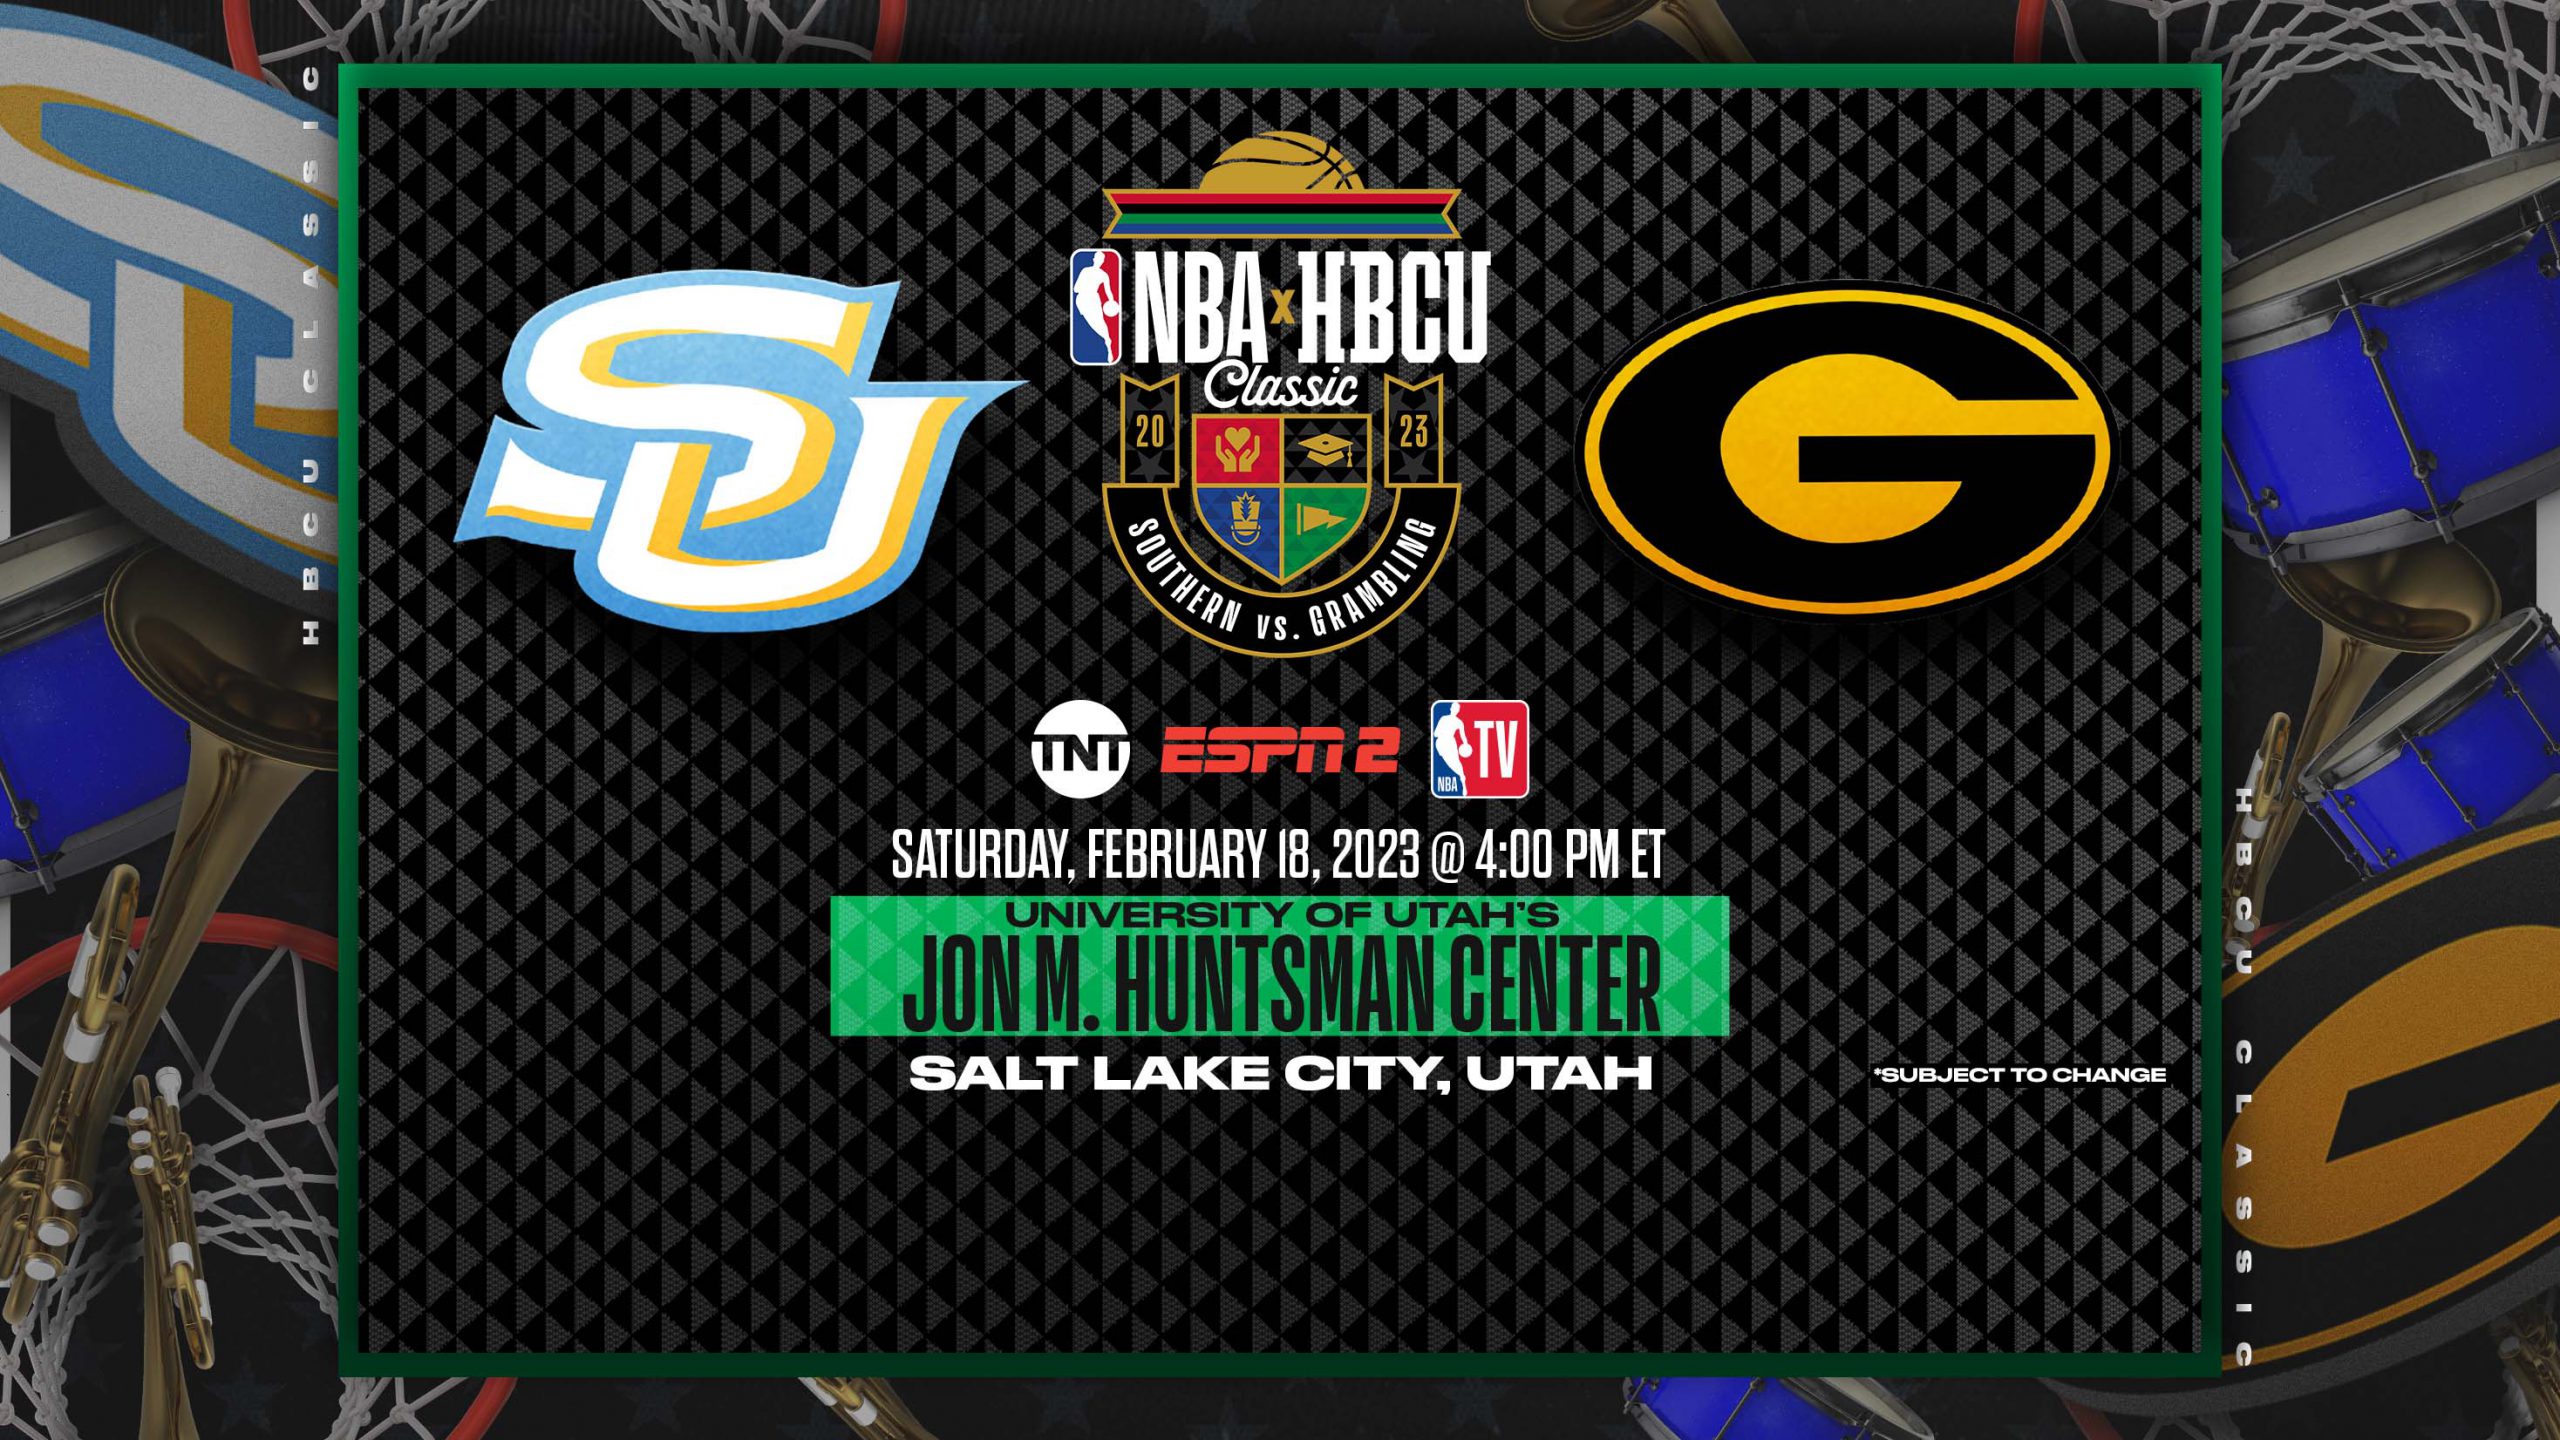 Grambling State University and Southern University to Play in NBA HBCU Classic 2023 on Feb. 18